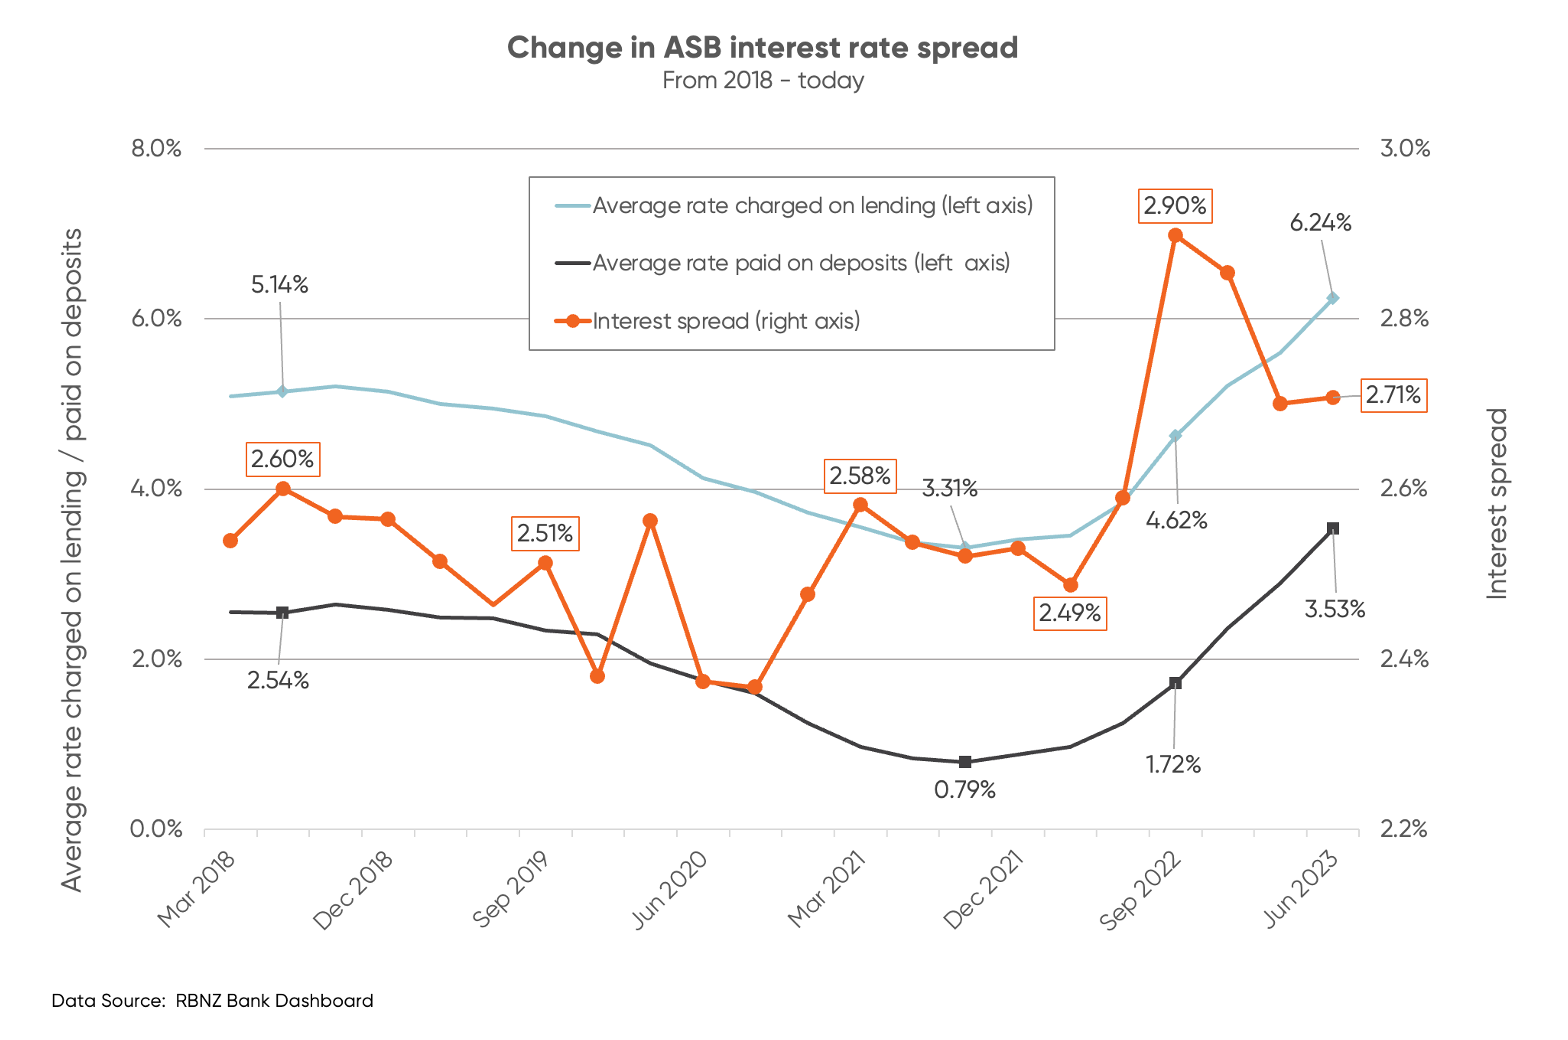 Graph tracking the change in ASB's interest rate spread from 2018 to today